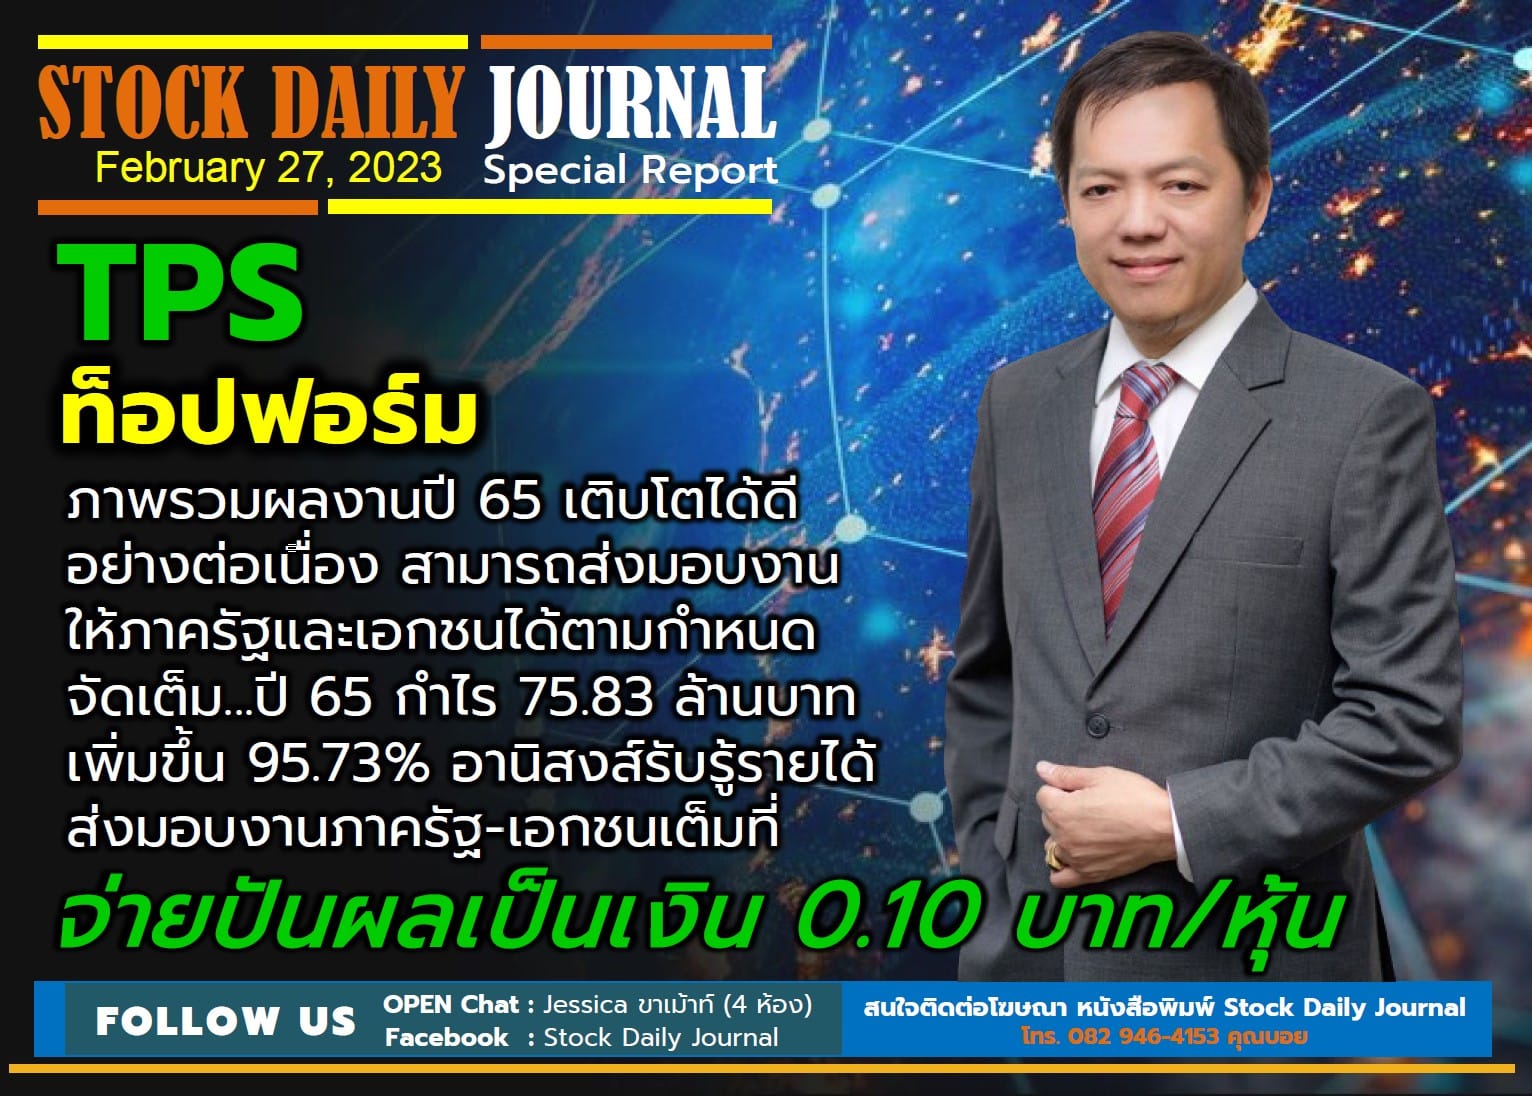 STOCK DAILY JOURNAL “Special Report : TPS”